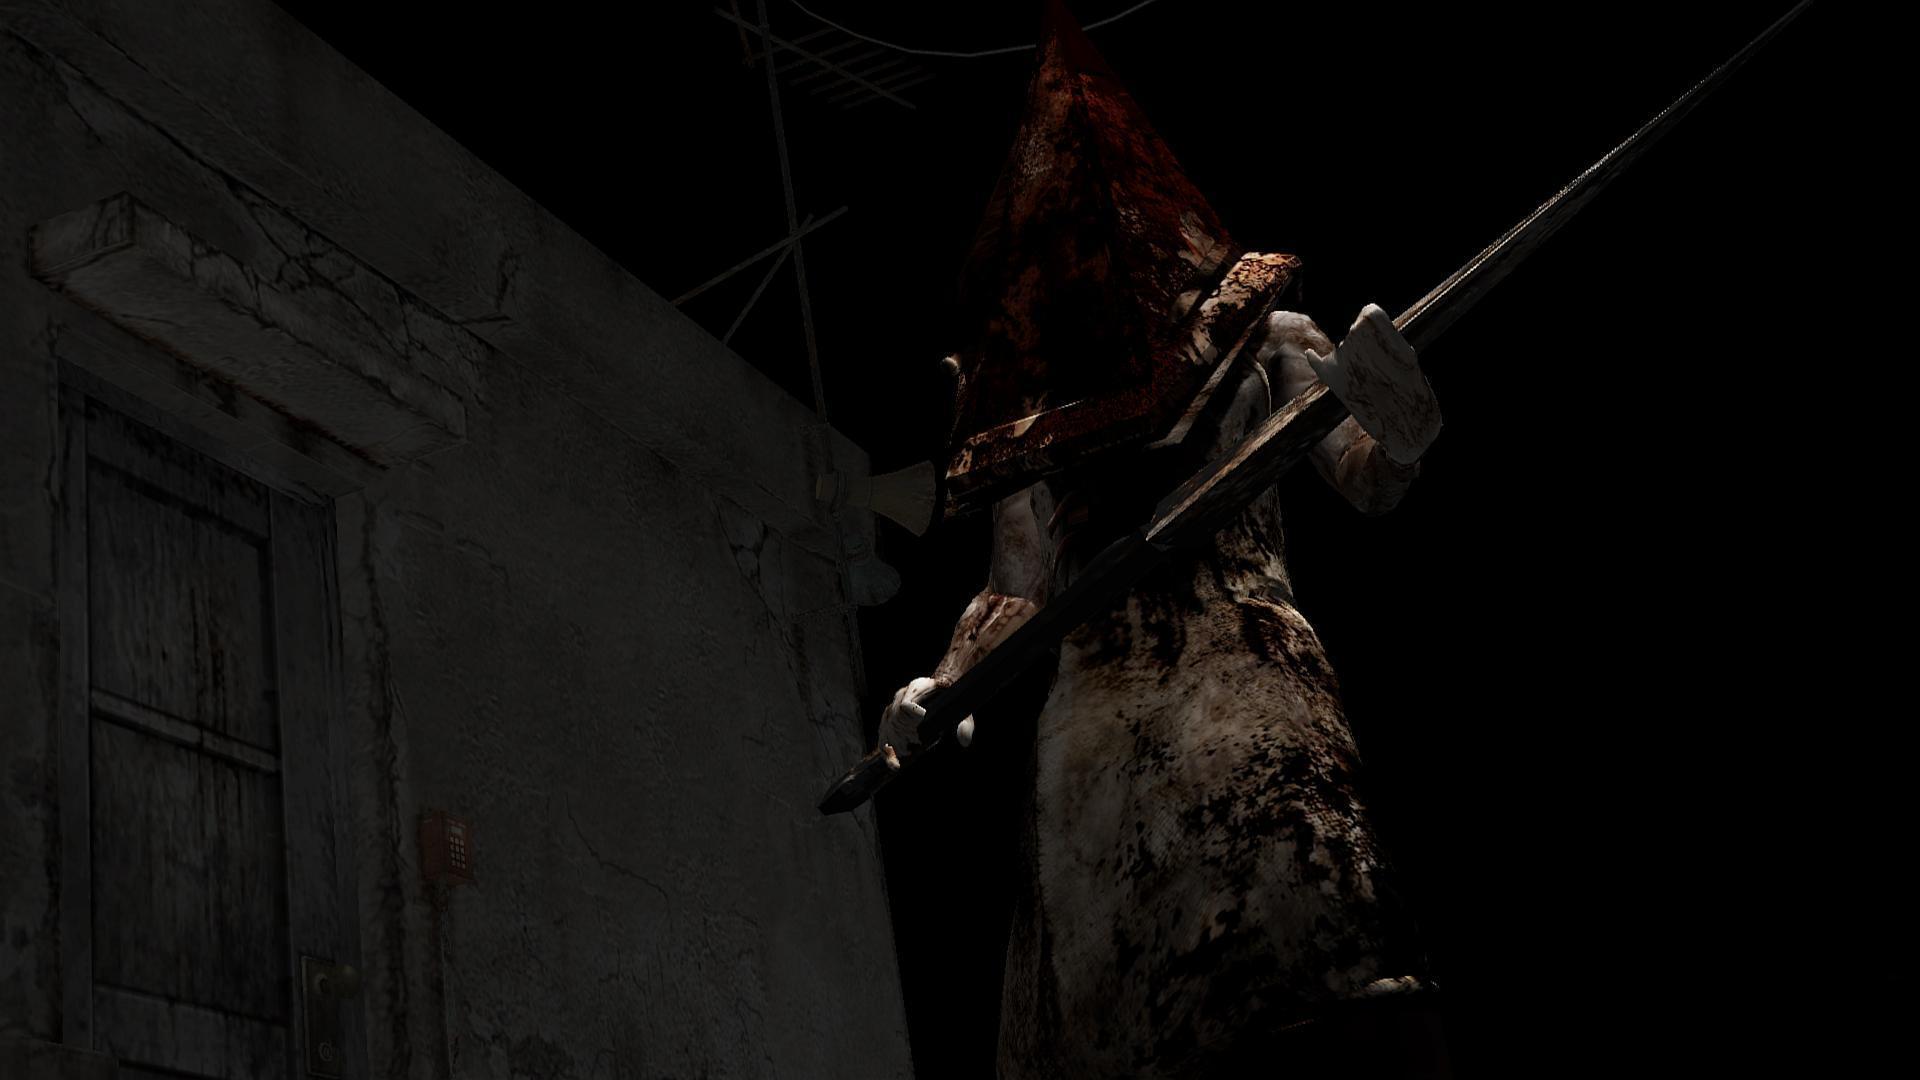 image For > Pyramid Head Wallpaper 1920x1080